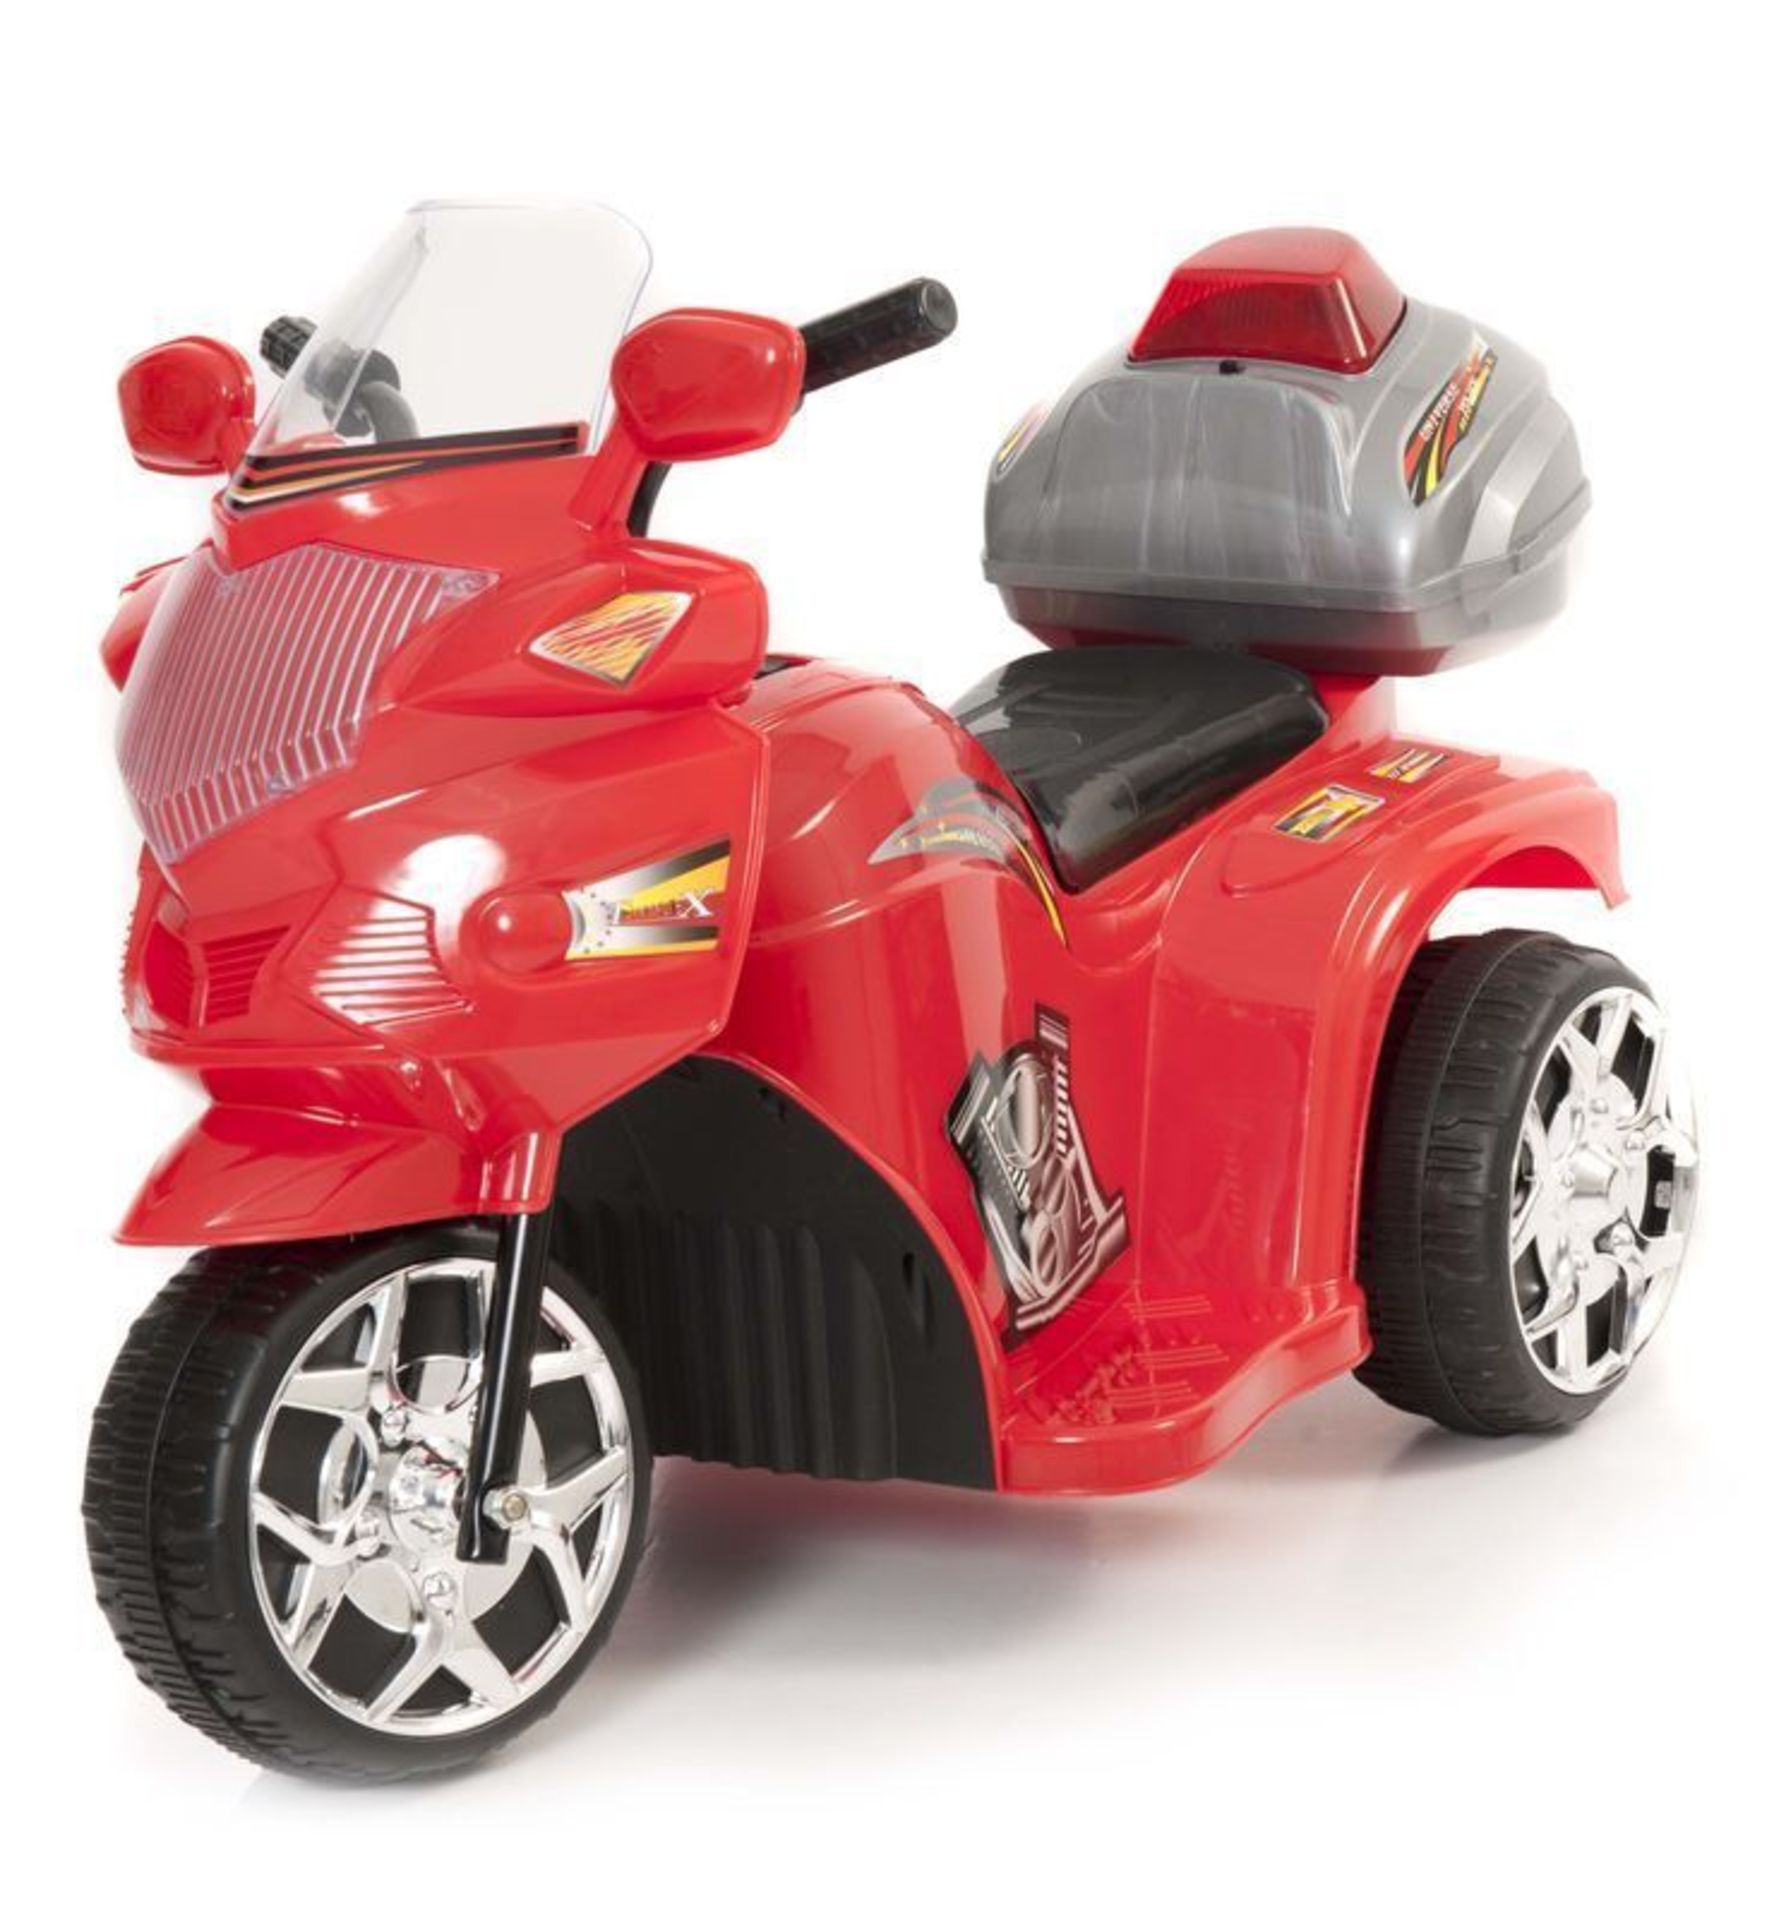 40 X 6V ELECTRIC RED POLICE-THEMED KIDS RIDEON TRIKES - BARGAIN! ** BRAND NEW **